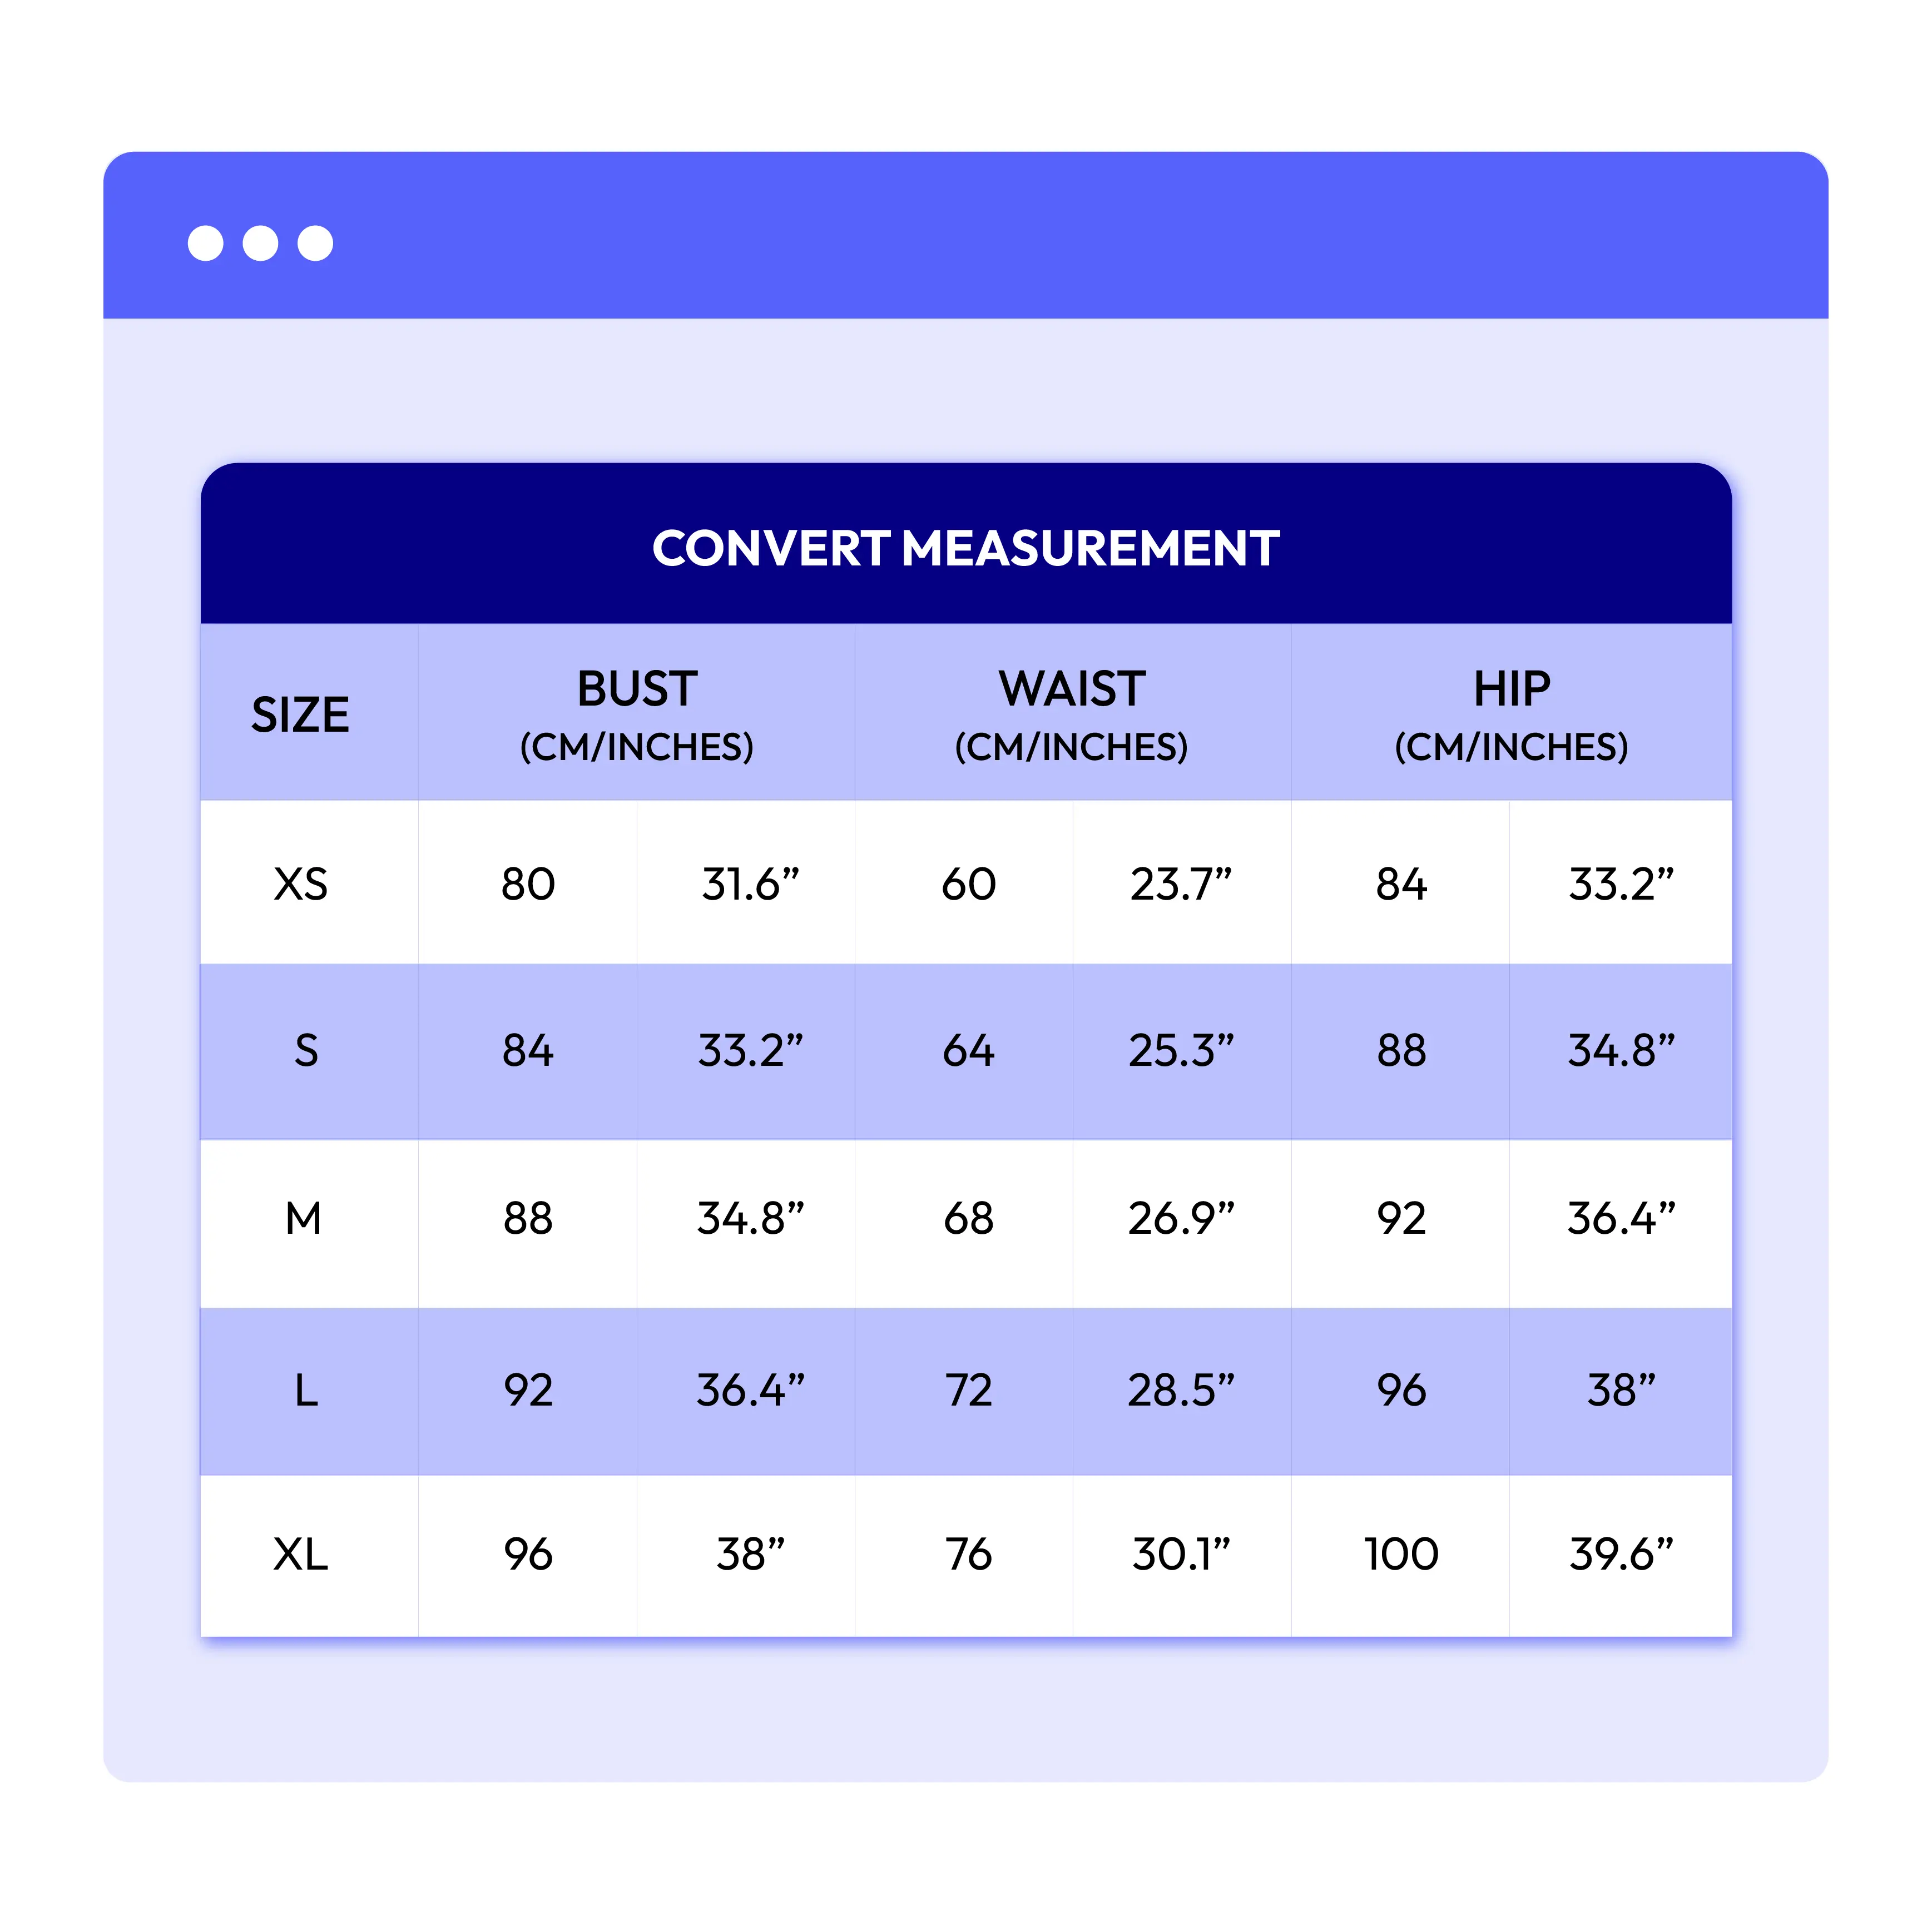 Convert measurement types in size charts